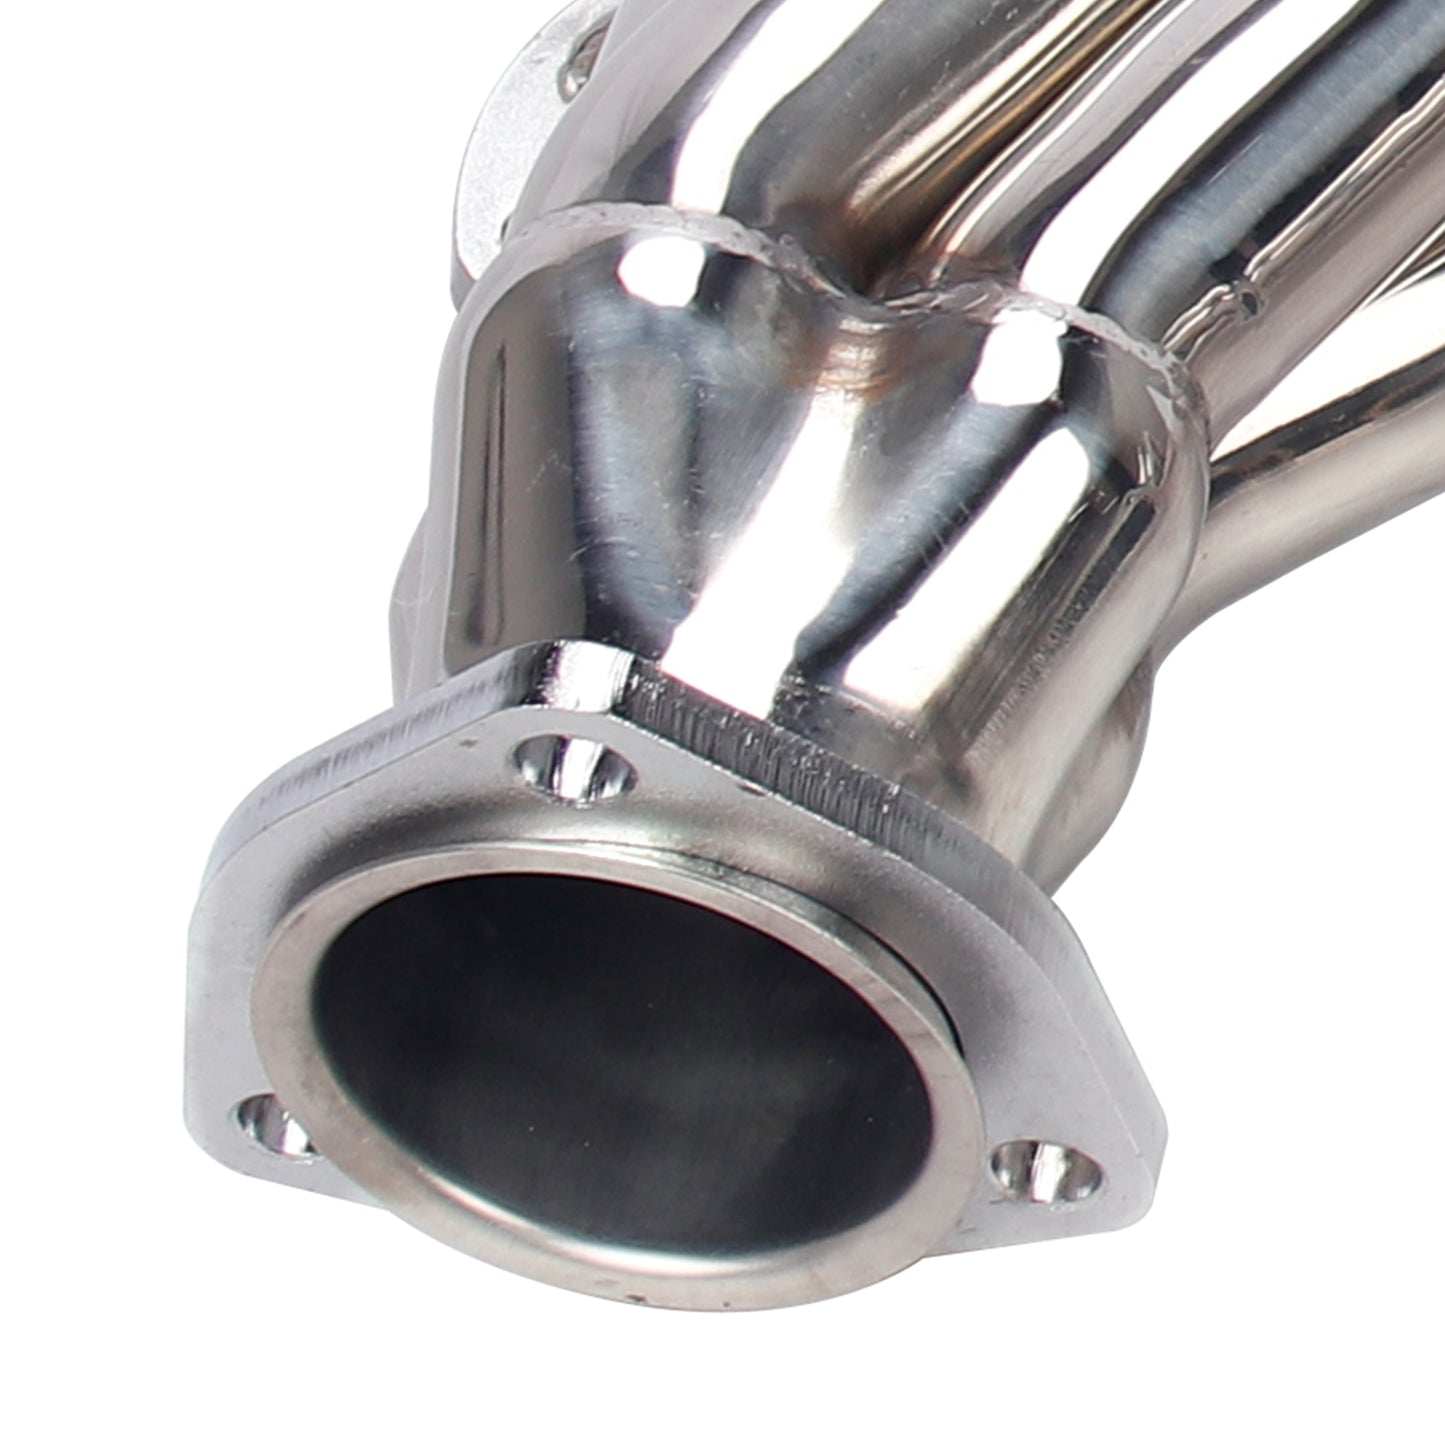 Header Exhaust pipes Fits Small Block Chevy Blazer S10 S15 2WD 350 V8 GMC Engine Swap SS Headers